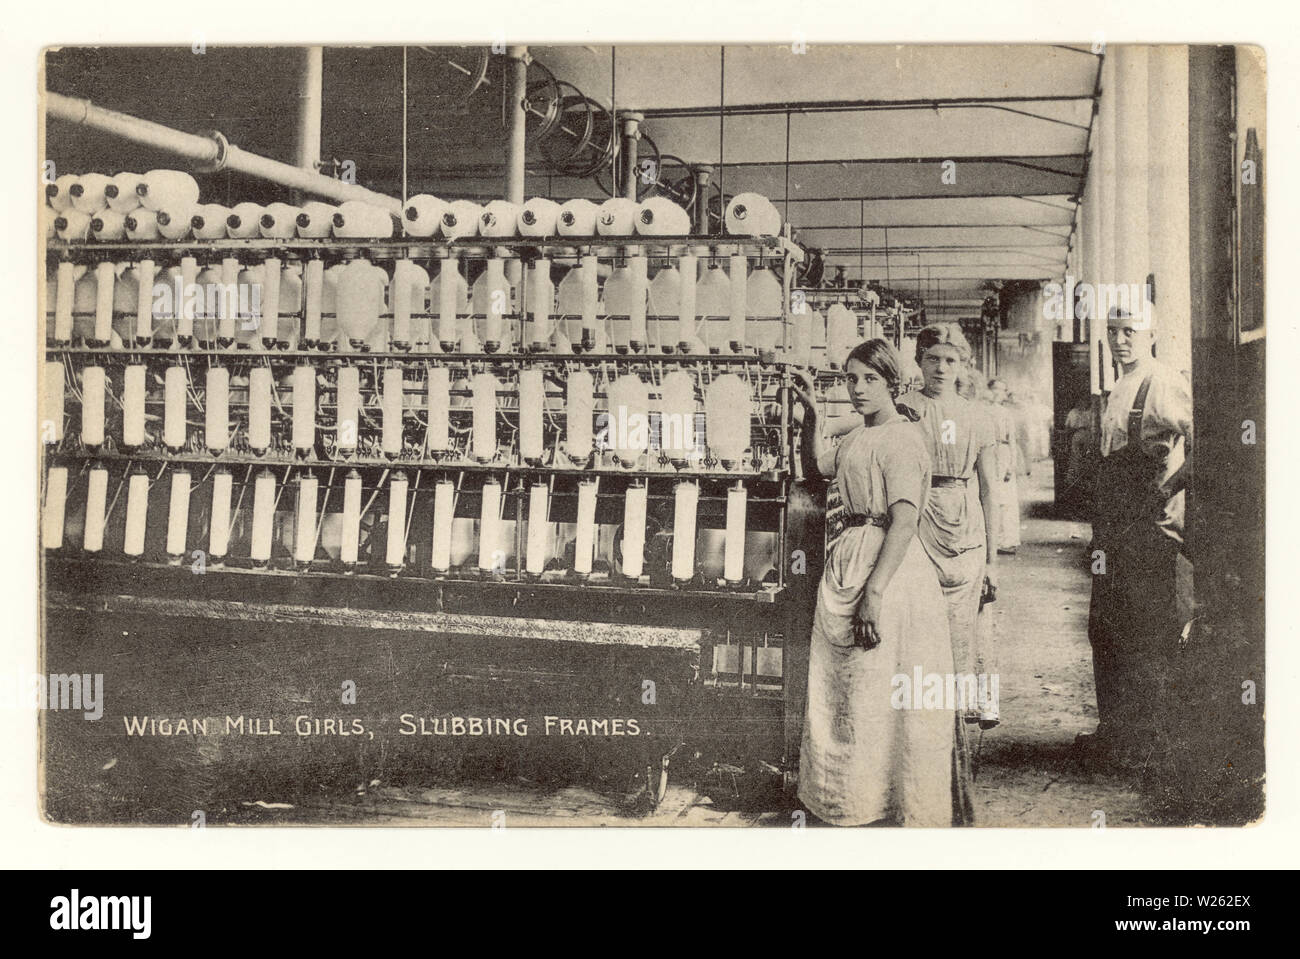 Early postcard printed at bottom is  'Wigan Mill girls,slubbing frames', with overseer / foreman standing beside slubbing frames - a machine used to straighten out the fibres in cotton prior to spinning 'Lancashire Lasses',  circa 1910, Wigan, Greater Manchester, U.K. Stock Photo